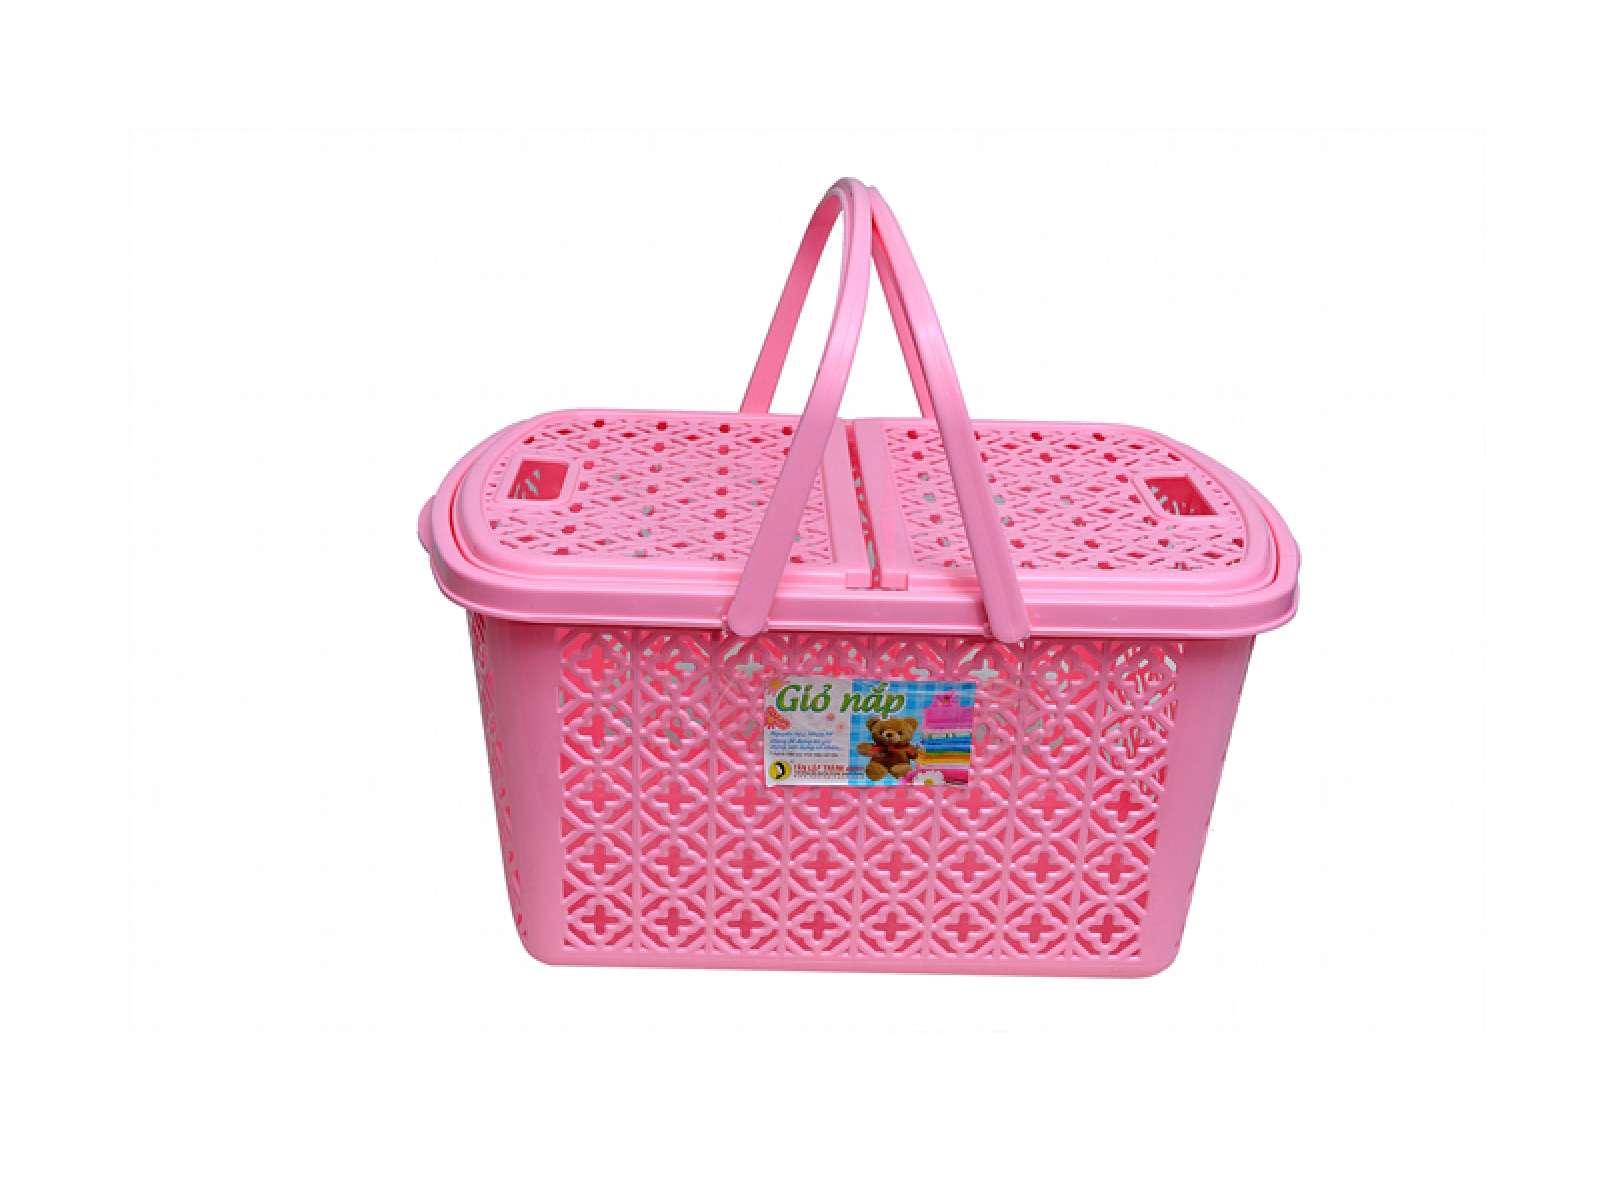 Hamper with lids - Flowers pattern - Extra Large